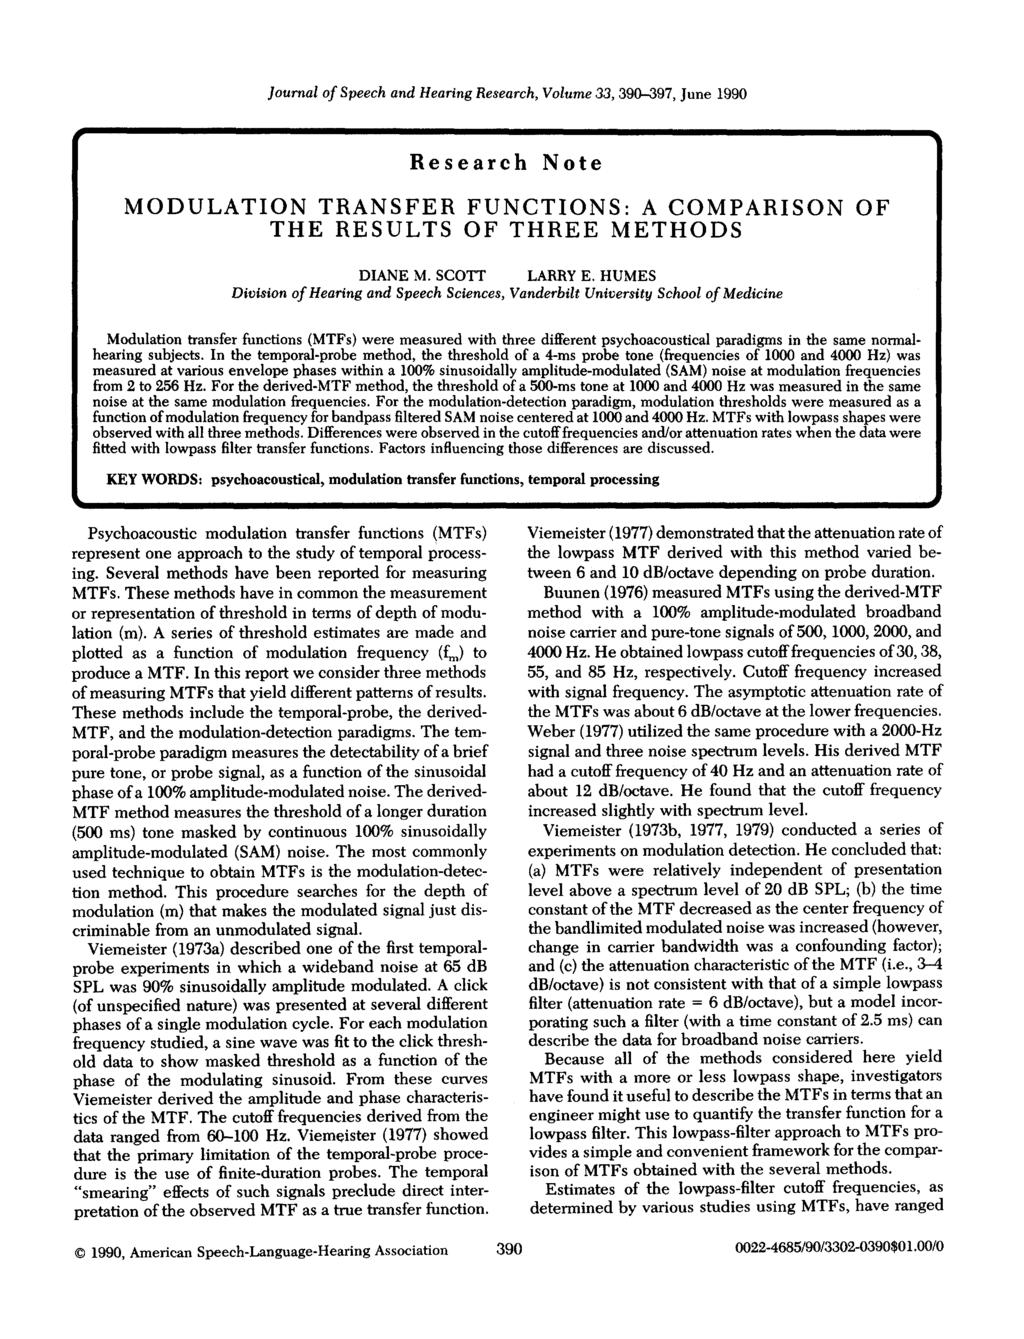 Journal of Speech and Hearing Research, Volume 33, 390-397, June 1990 Research Note MODULATION TRANSFER FUNCTIONS: A COMPARISON OF THE RESULTS OF THREE METHODS DIANE M. SCOTT LARRY E.